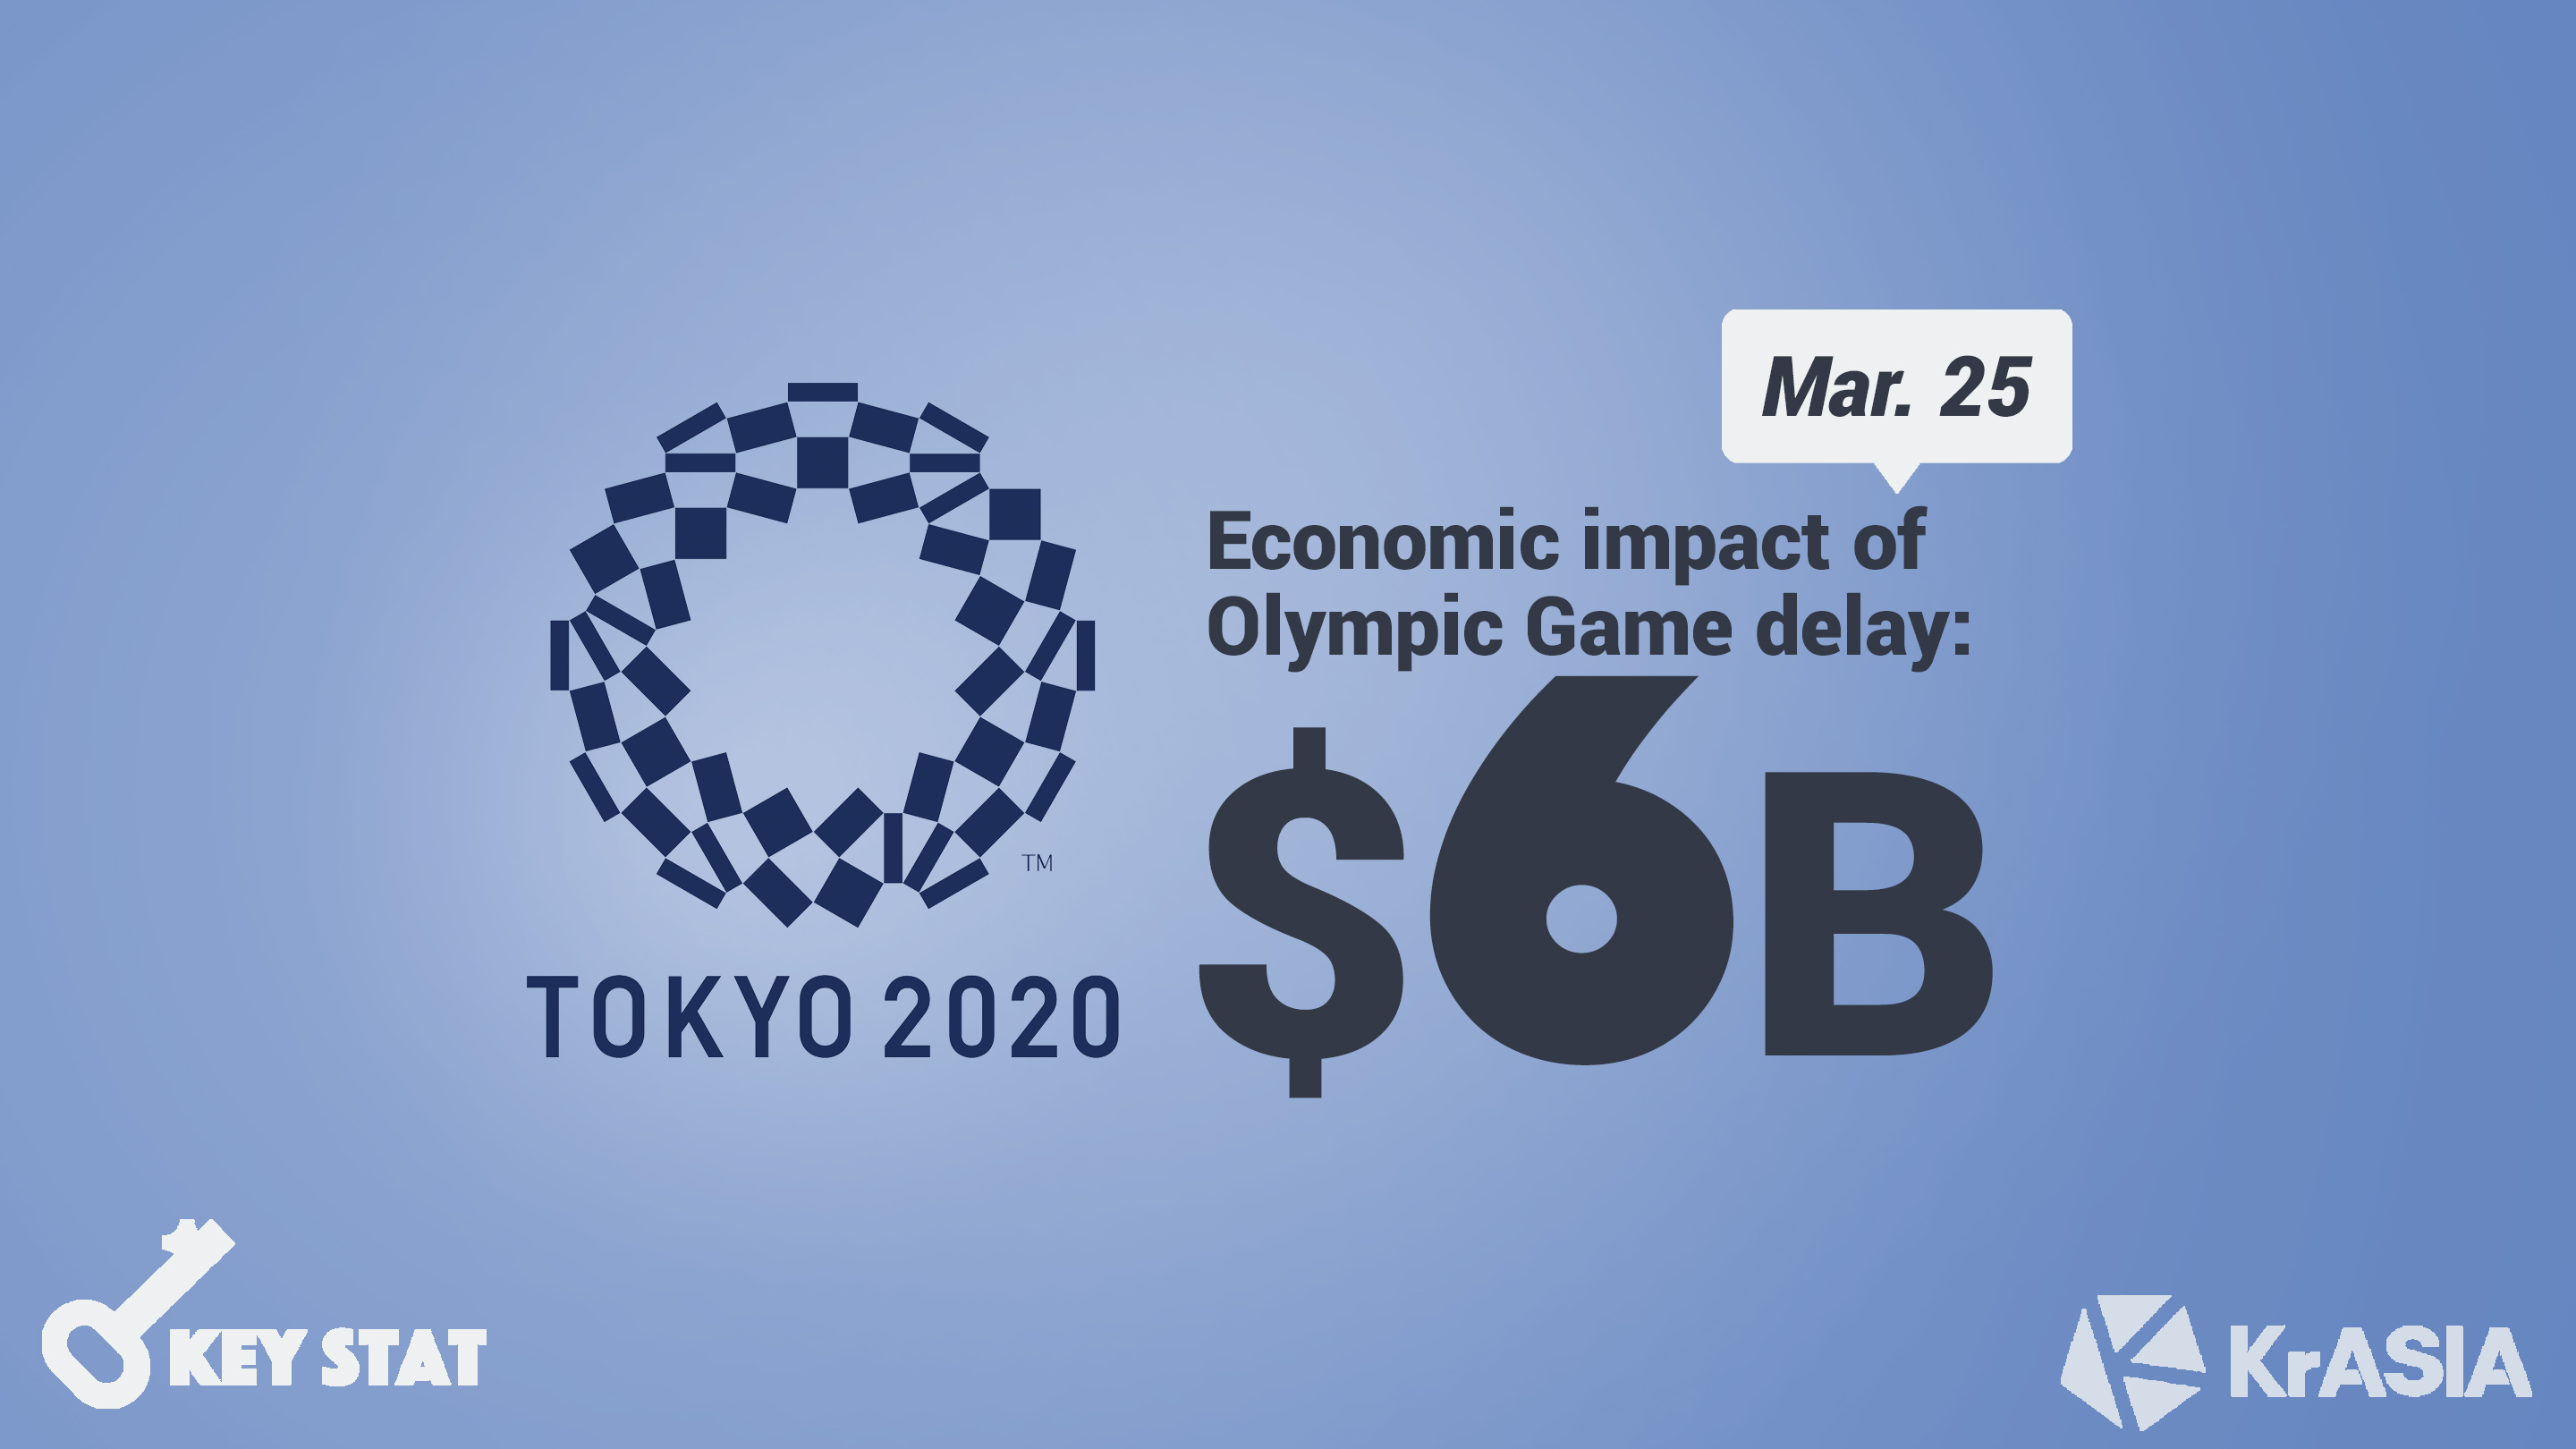 KEY STAT | Alibaba sees Olympic vision hanging in the air after postponement of Tokyo Games